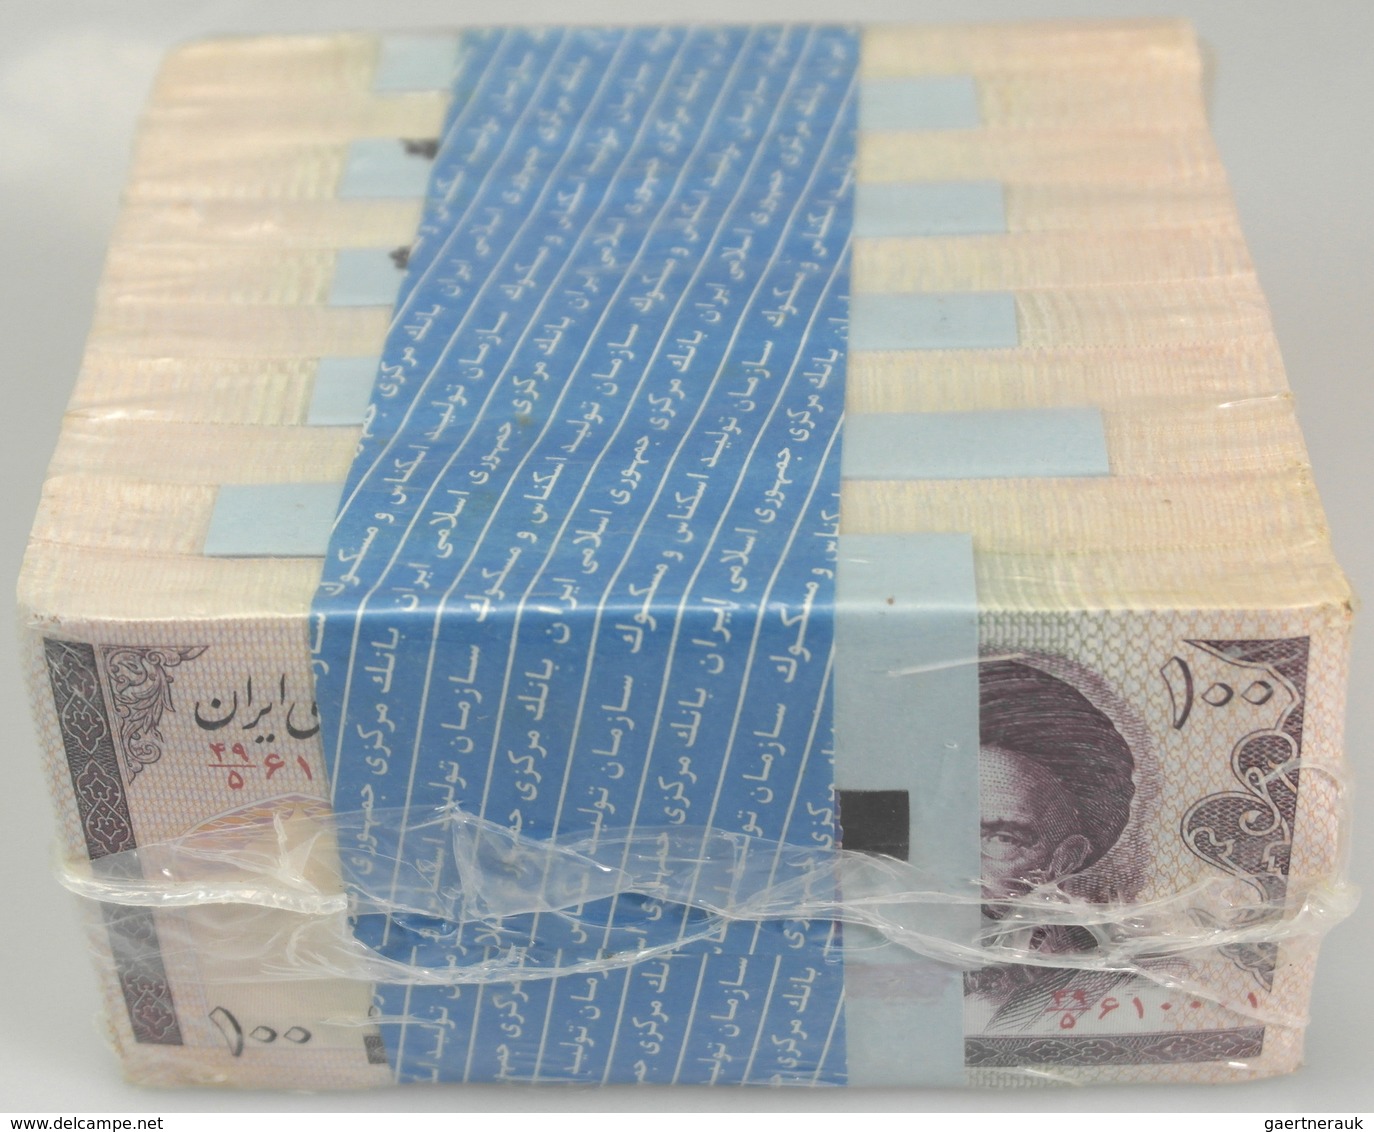 Iran: Complete Original Brick Of 1000 Banknotes 100 Rials ND P. 140, All Notes In Condition: UNC. (1 - Iran